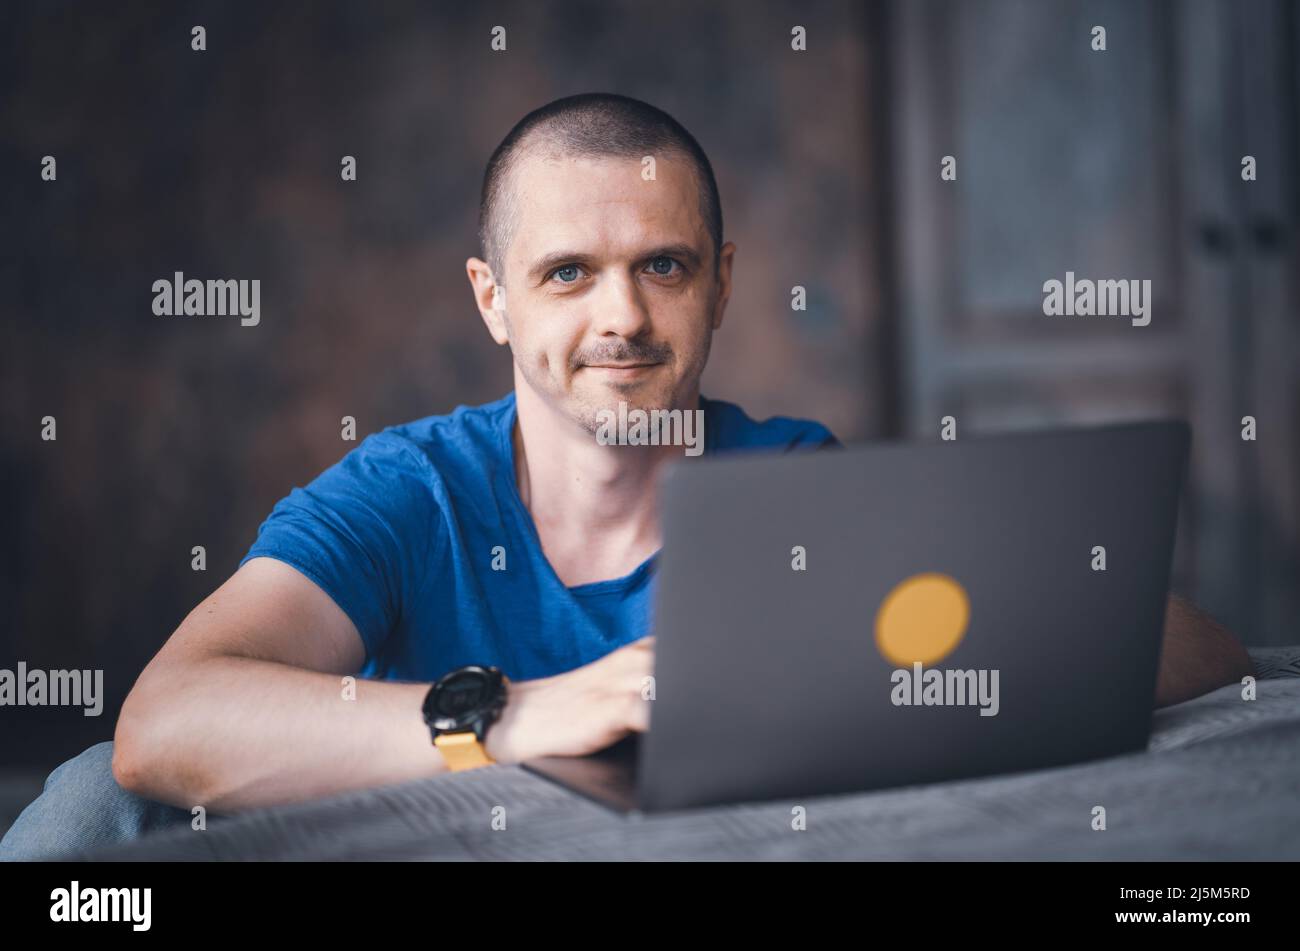 Adult man in blue t-shirt working on laptop Stock Photo